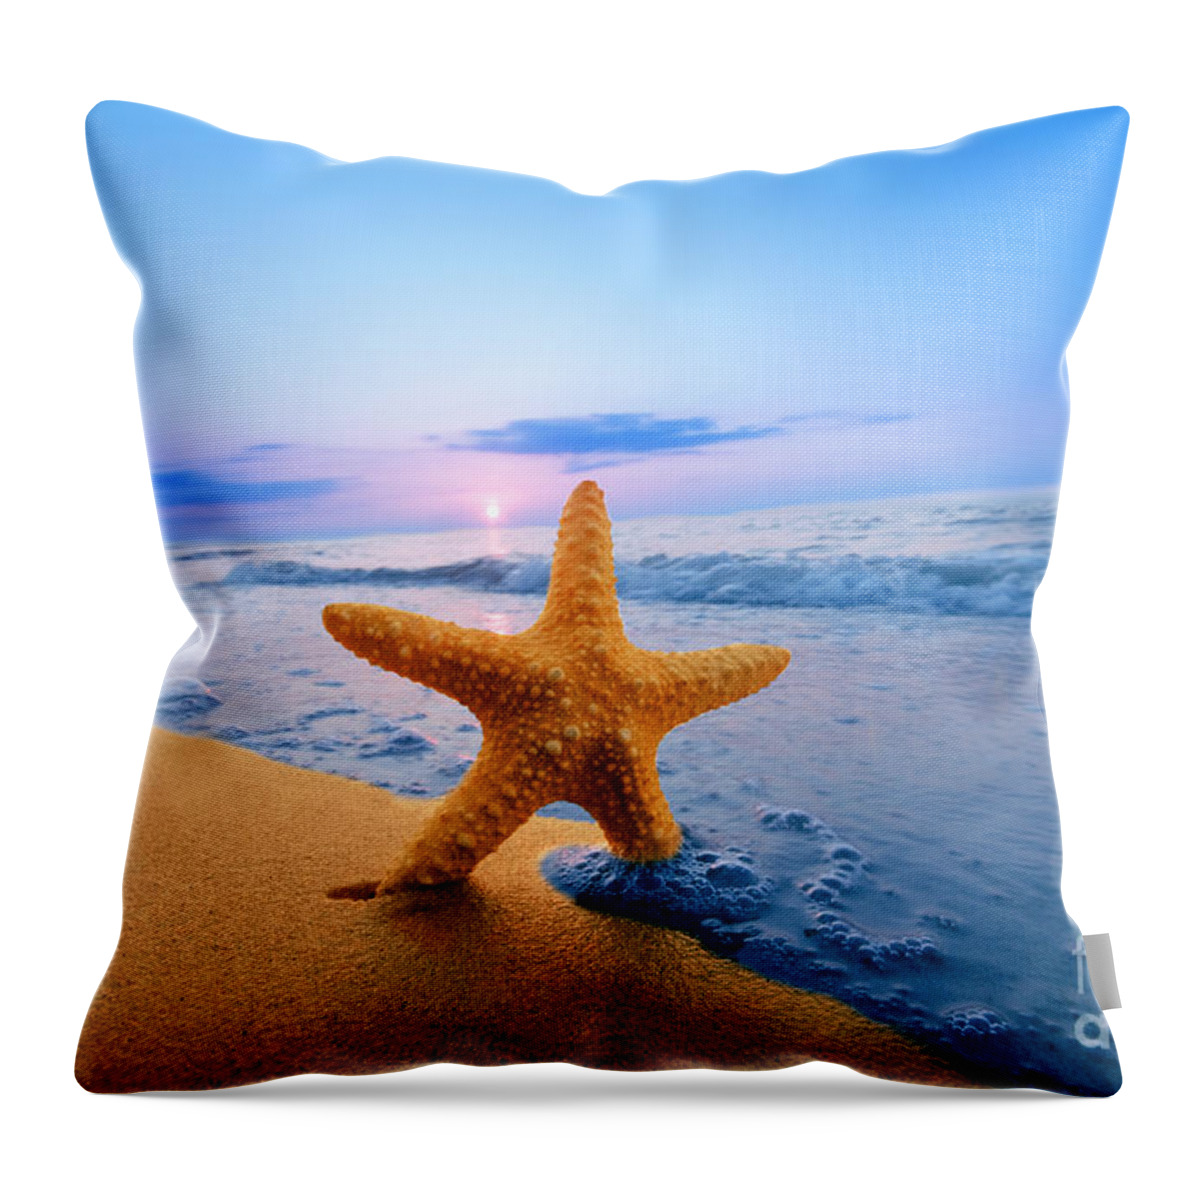 Background Throw Pillow featuring the photograph Starfish #9 by Michal Bednarek